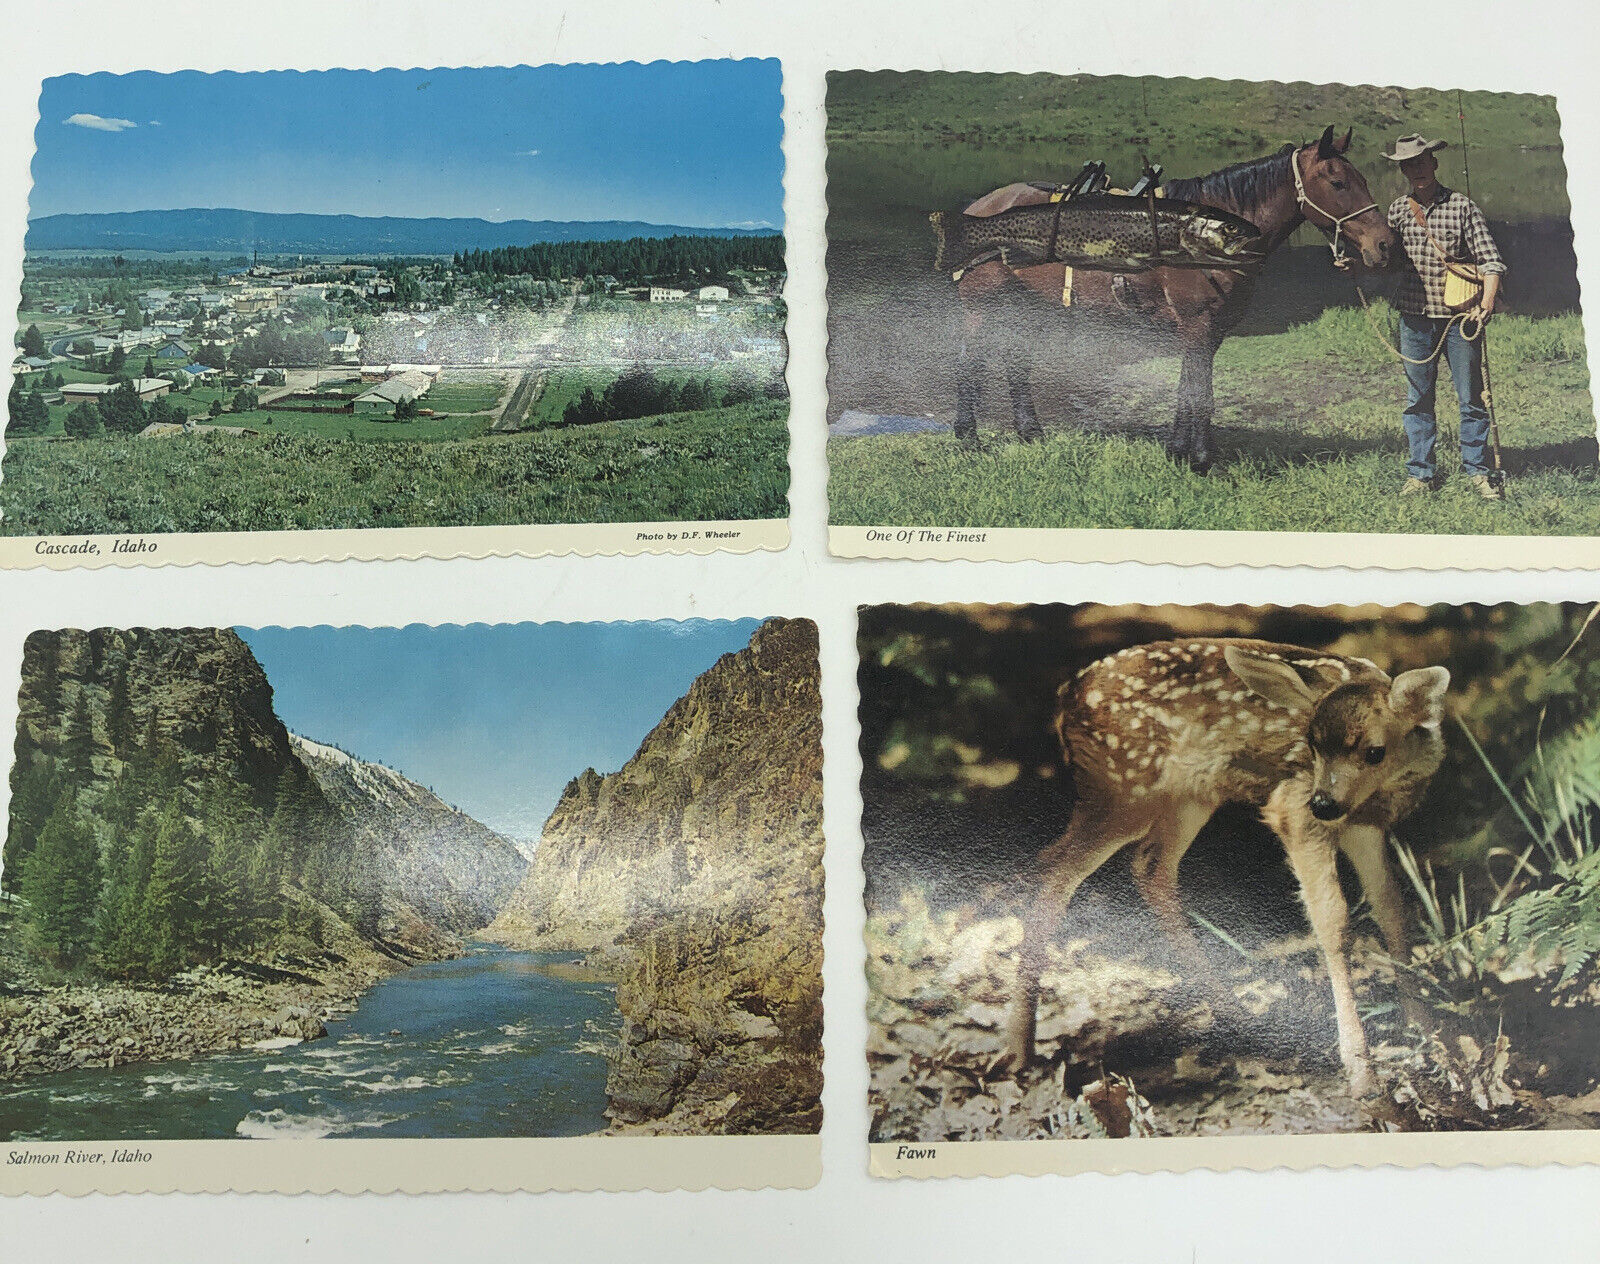 Lot of 4 Vtg Idaho Post cards Cascade Salmon River Twin Fawn One Of the Finest 